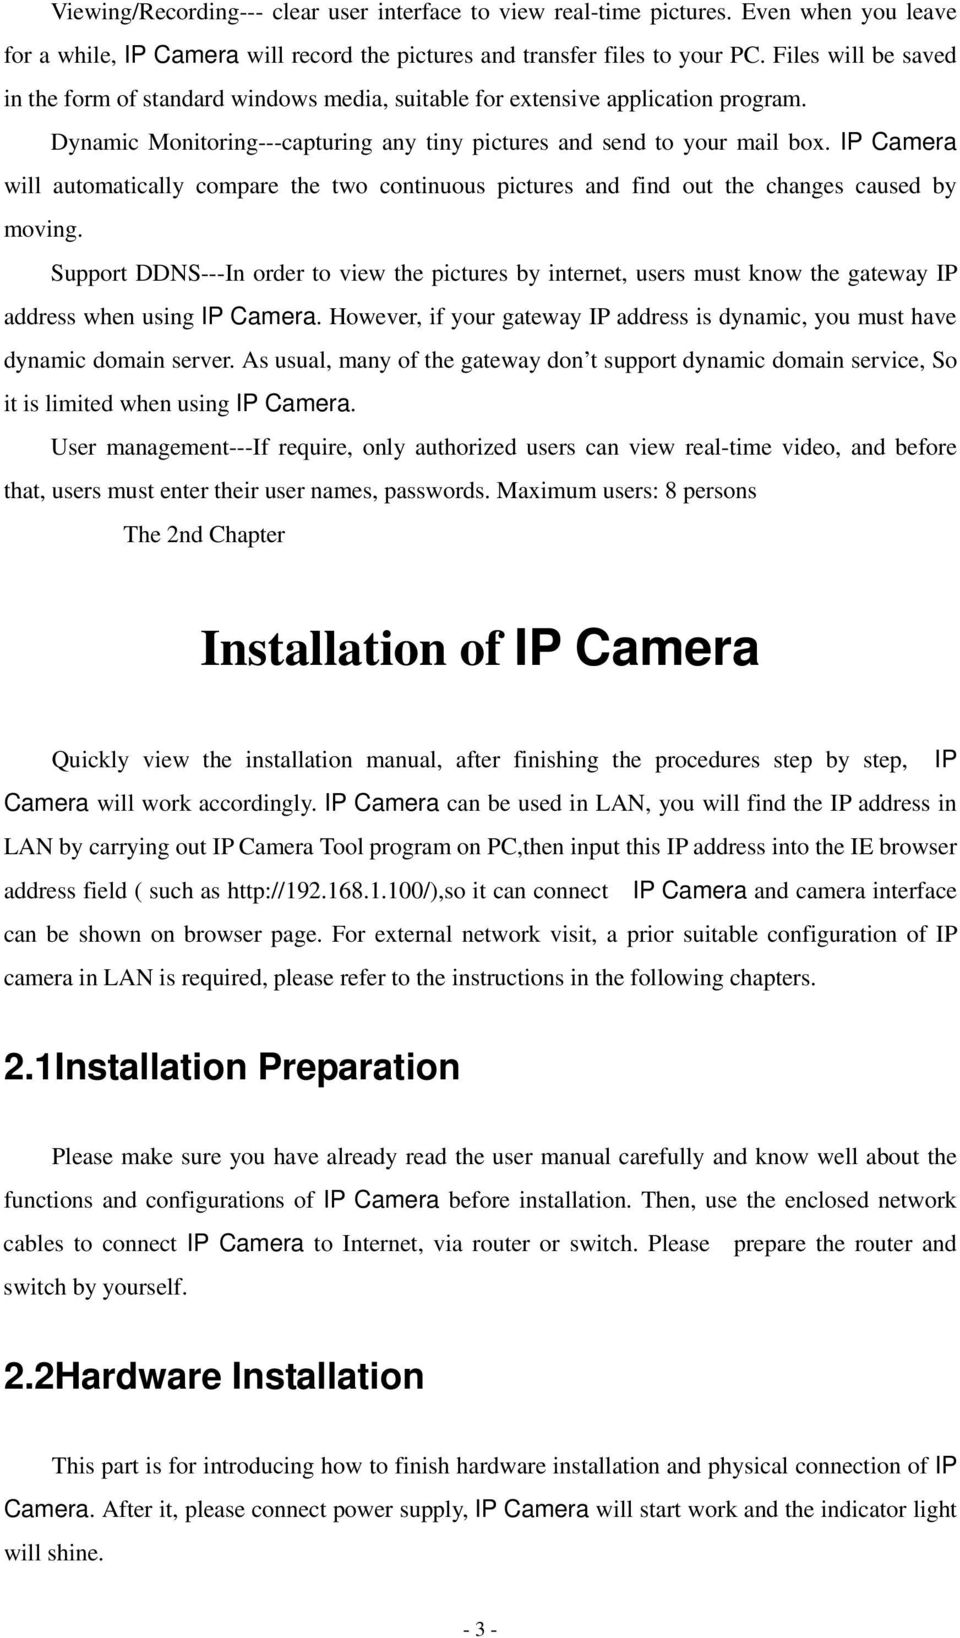 IP Camera will automatically compare the two continuous pictures and find out the changes caused by moving.